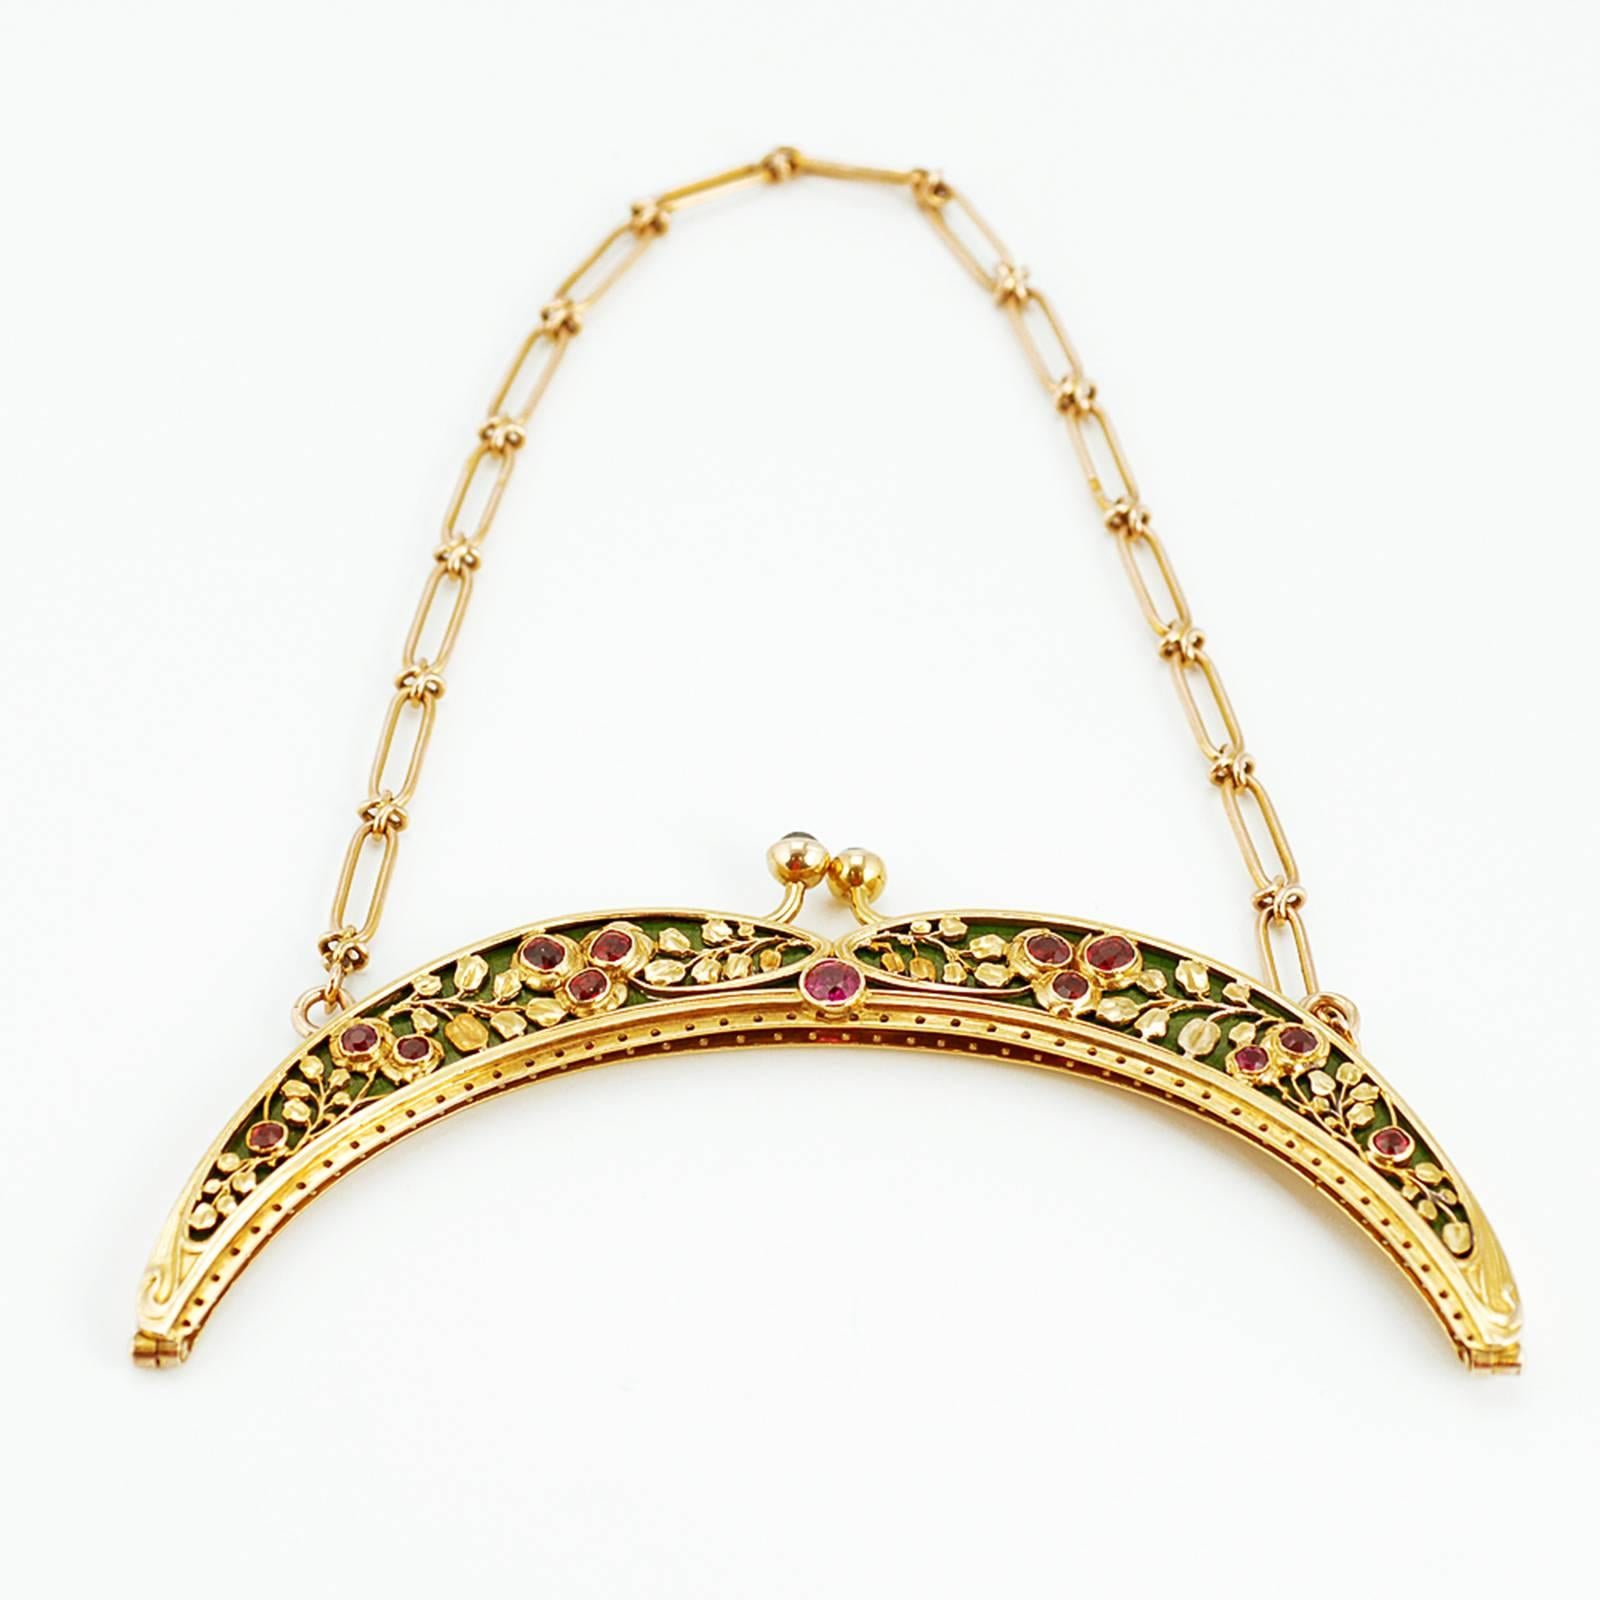 A Russian Art Nouveau jeweled varicolored gold and guilloché enamel purse frame for an evening bag, struck with Cyrillic maker’s mark VG for Vasilii Grishin, Moscow, circa 1899-1908. The arch-shaped frame with gold casework chased as a flowering